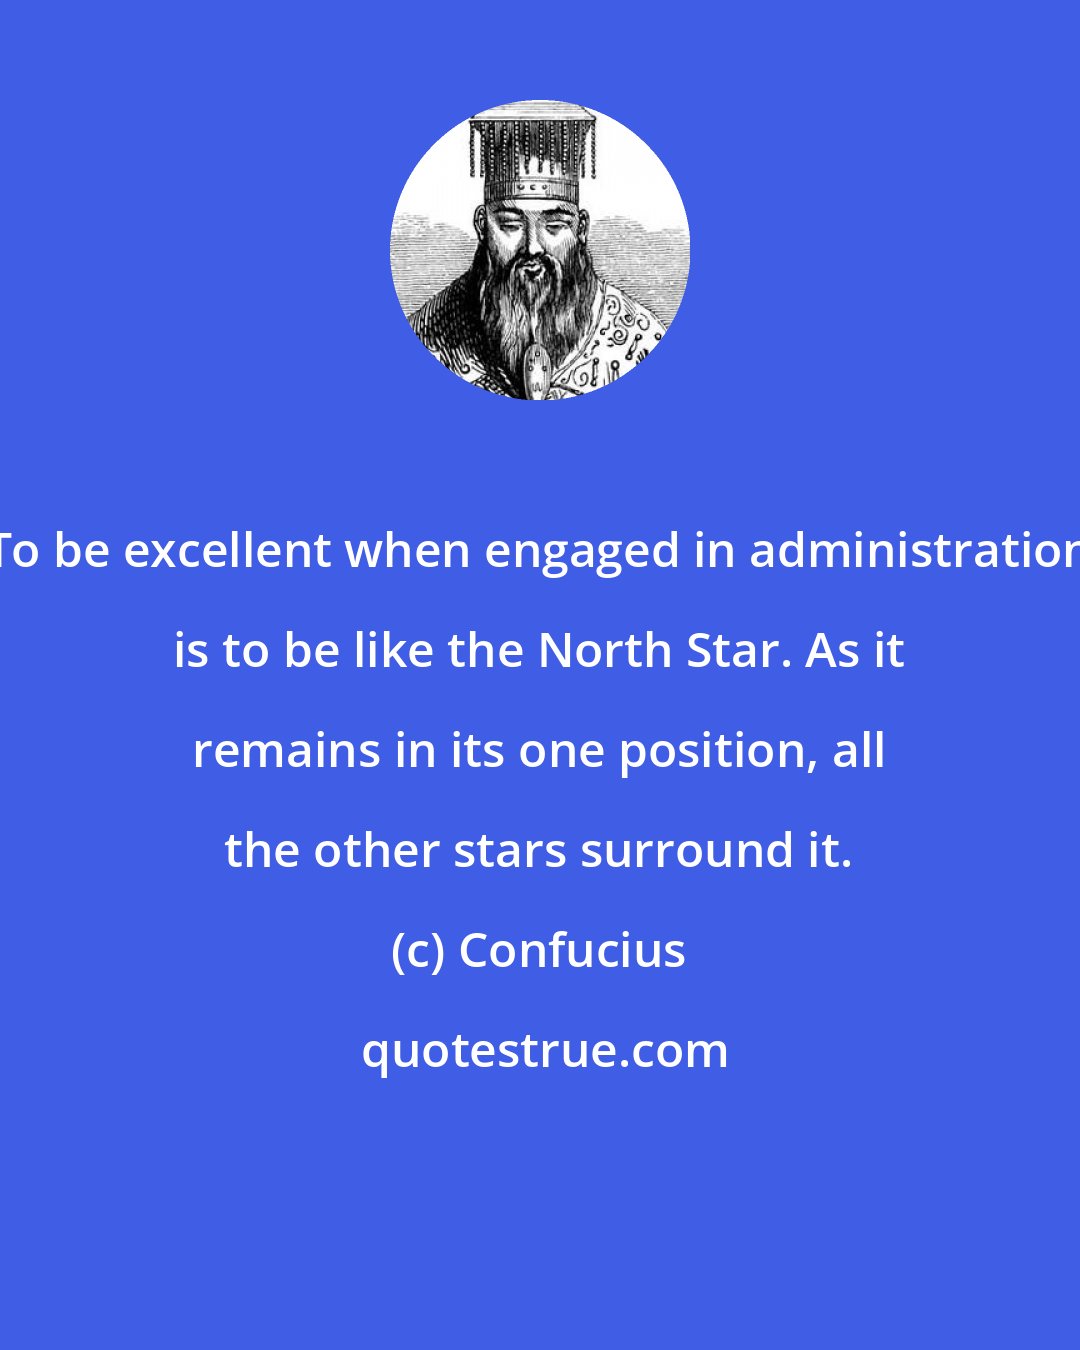 Confucius: To be excellent when engaged in administration is to be like the North Star. As it remains in its one position, all the other stars surround it.